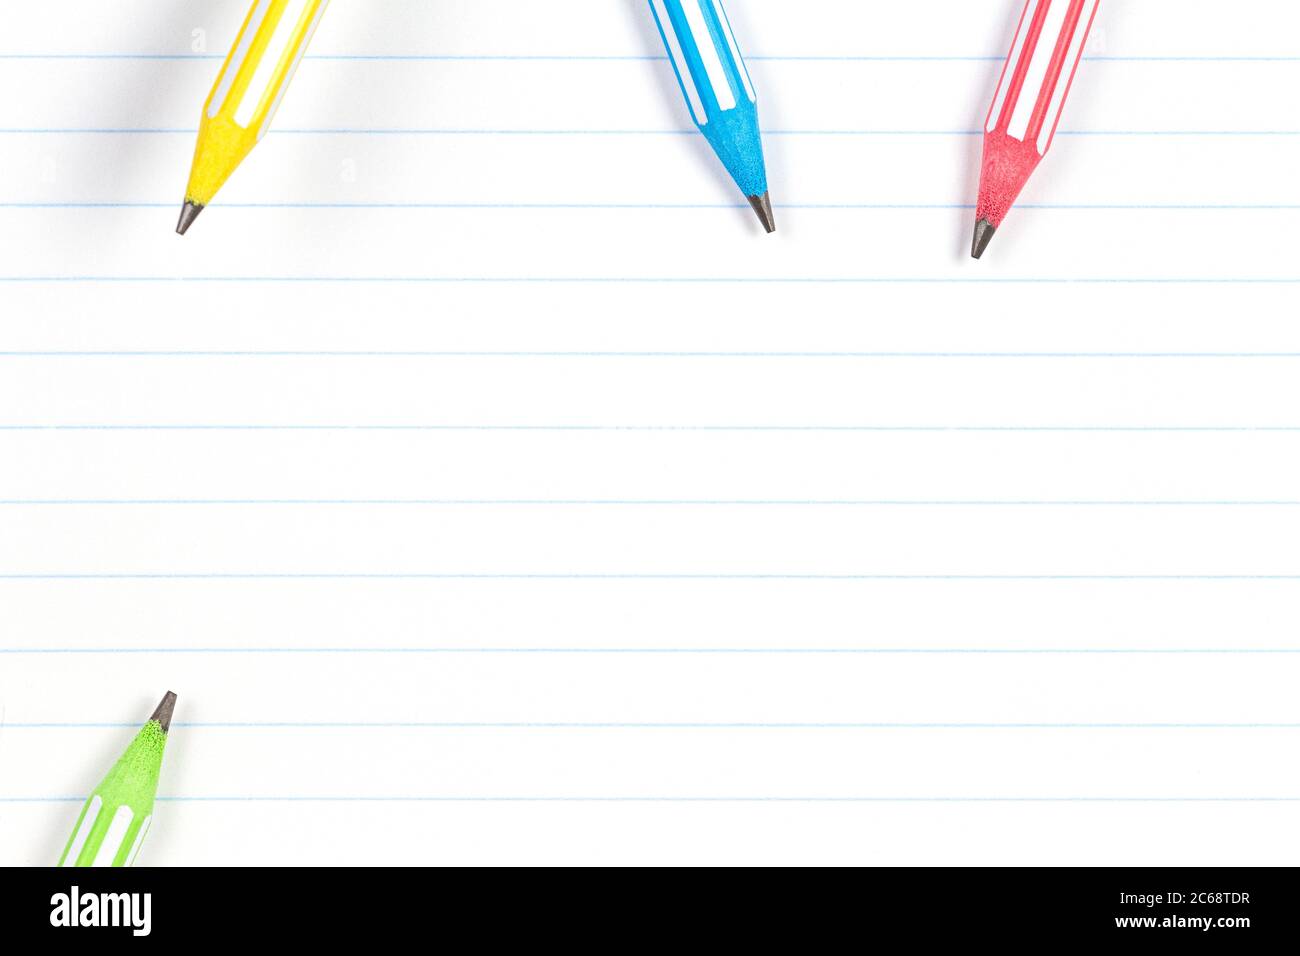 Colorful pencils on notebook lined paper background with copy space. Back  to school, education, learning concept Stock Photo - Alamy